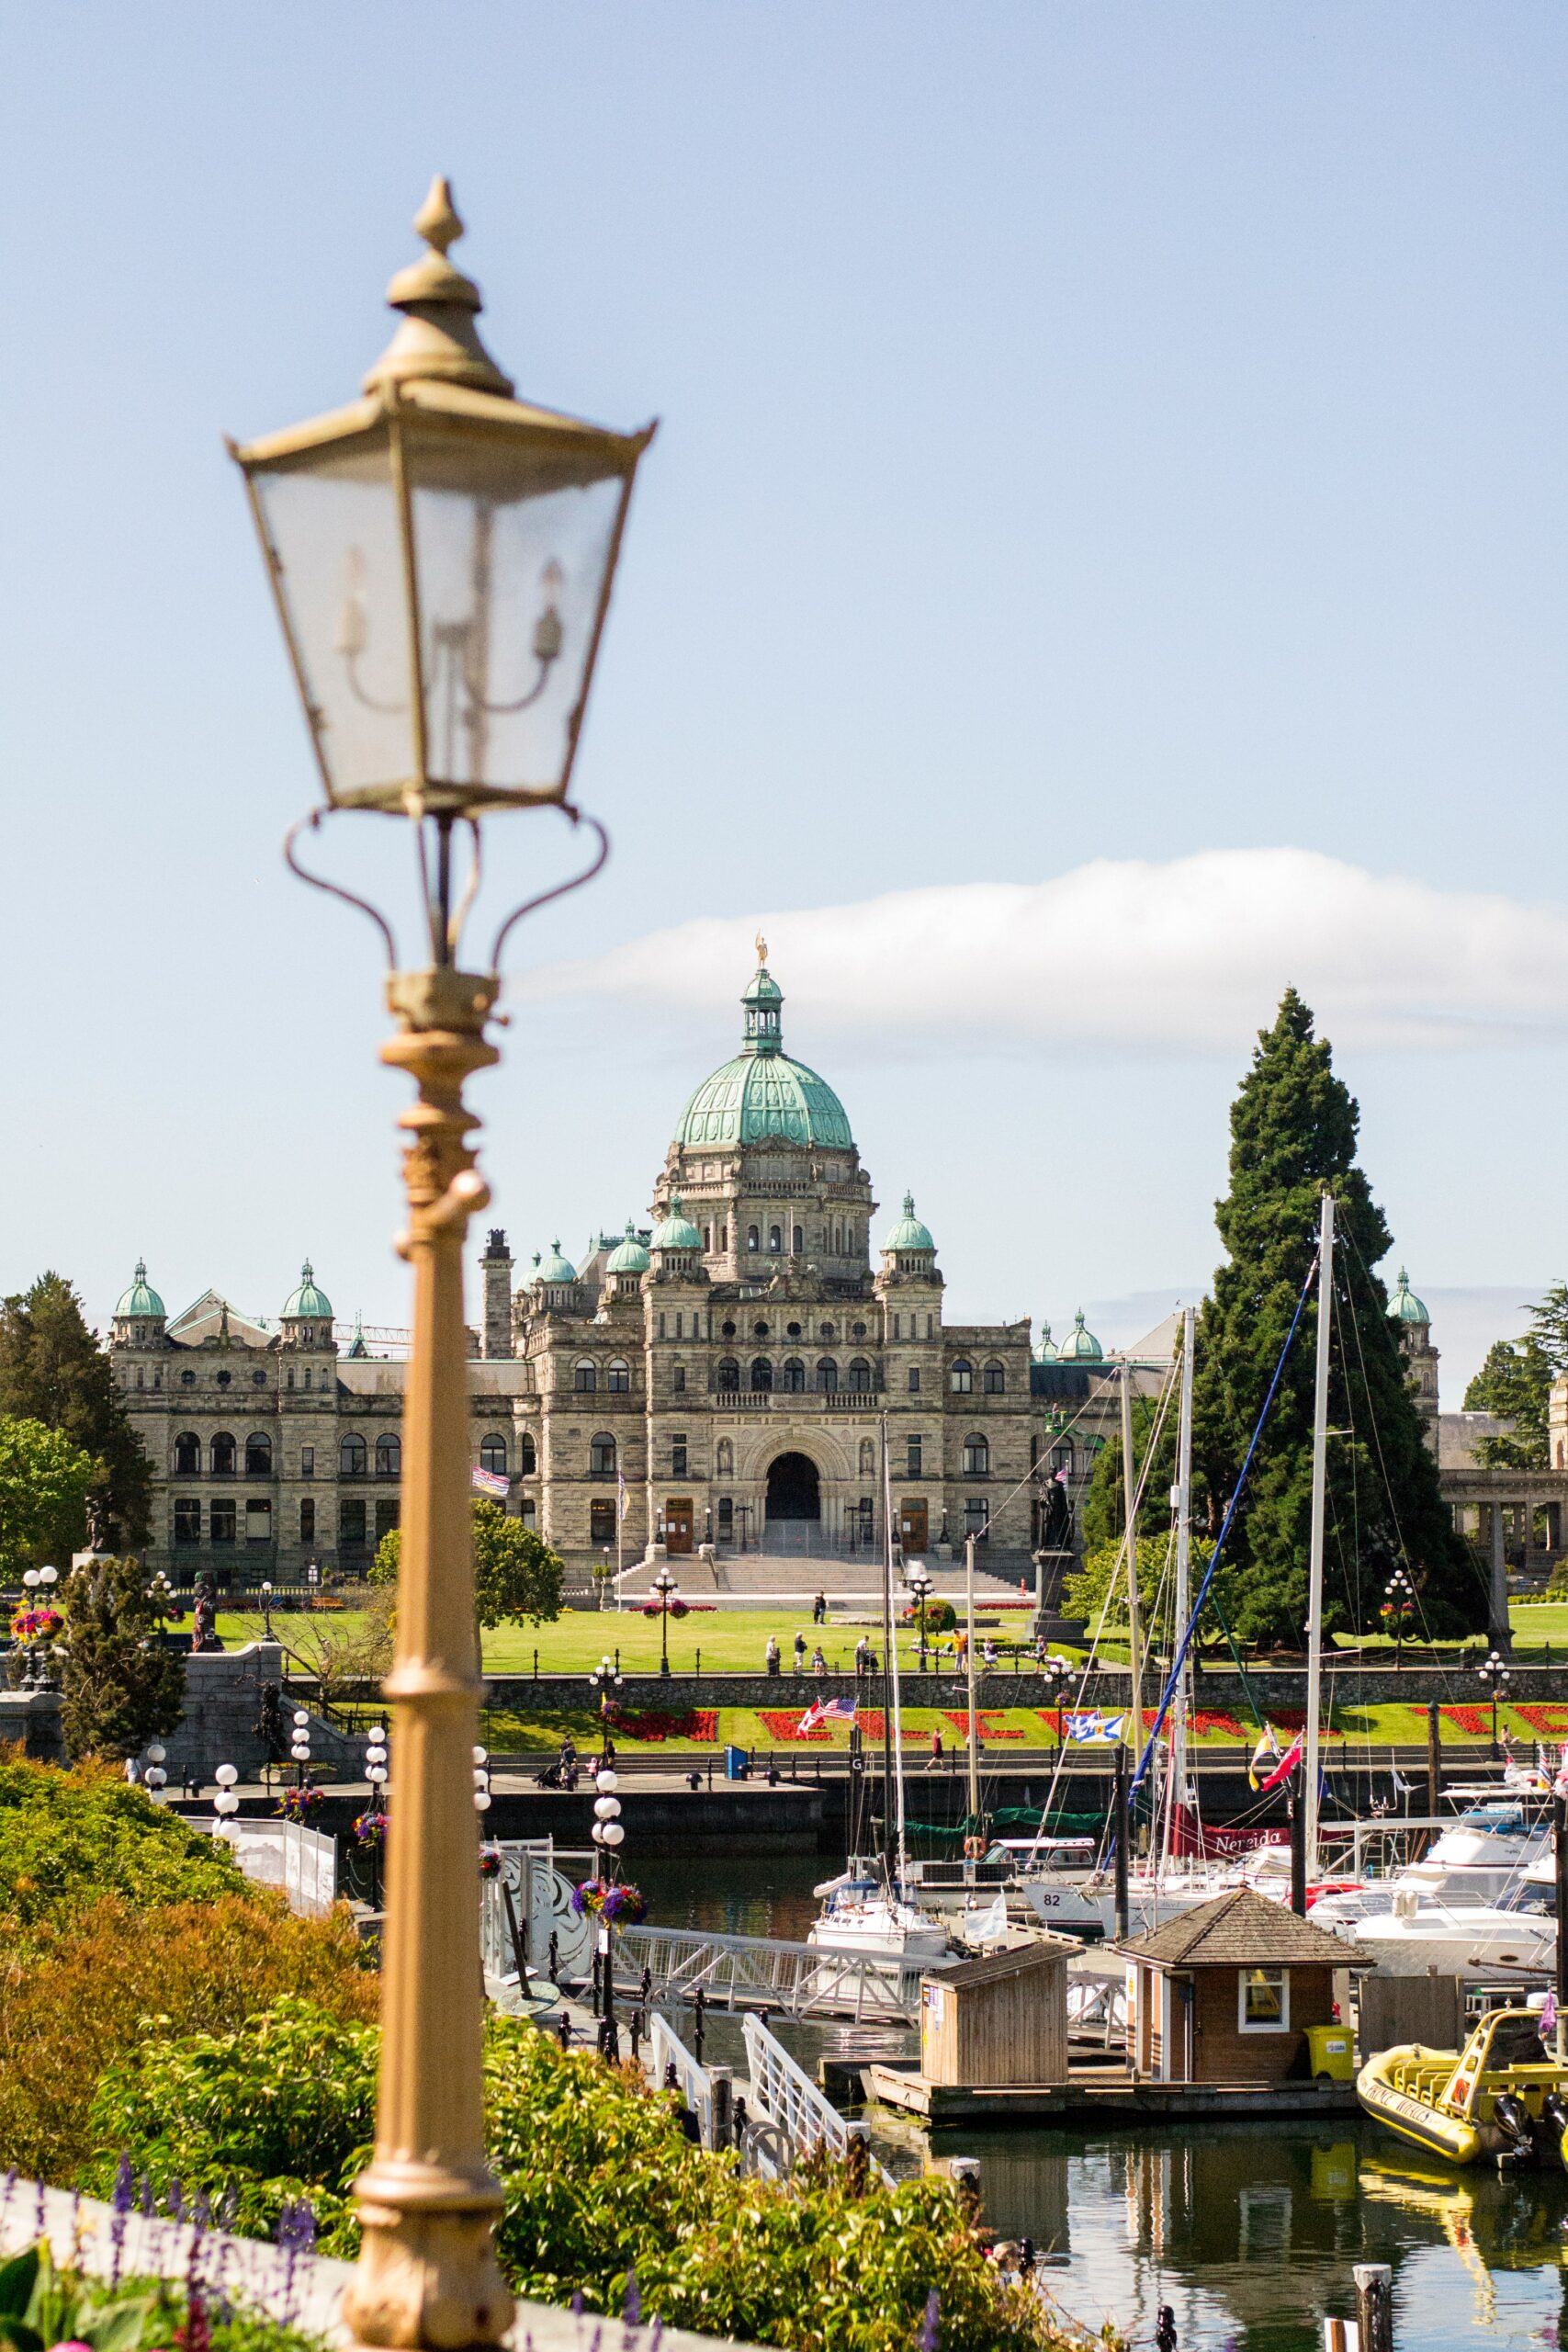 A view of Victoria and its Parliament building